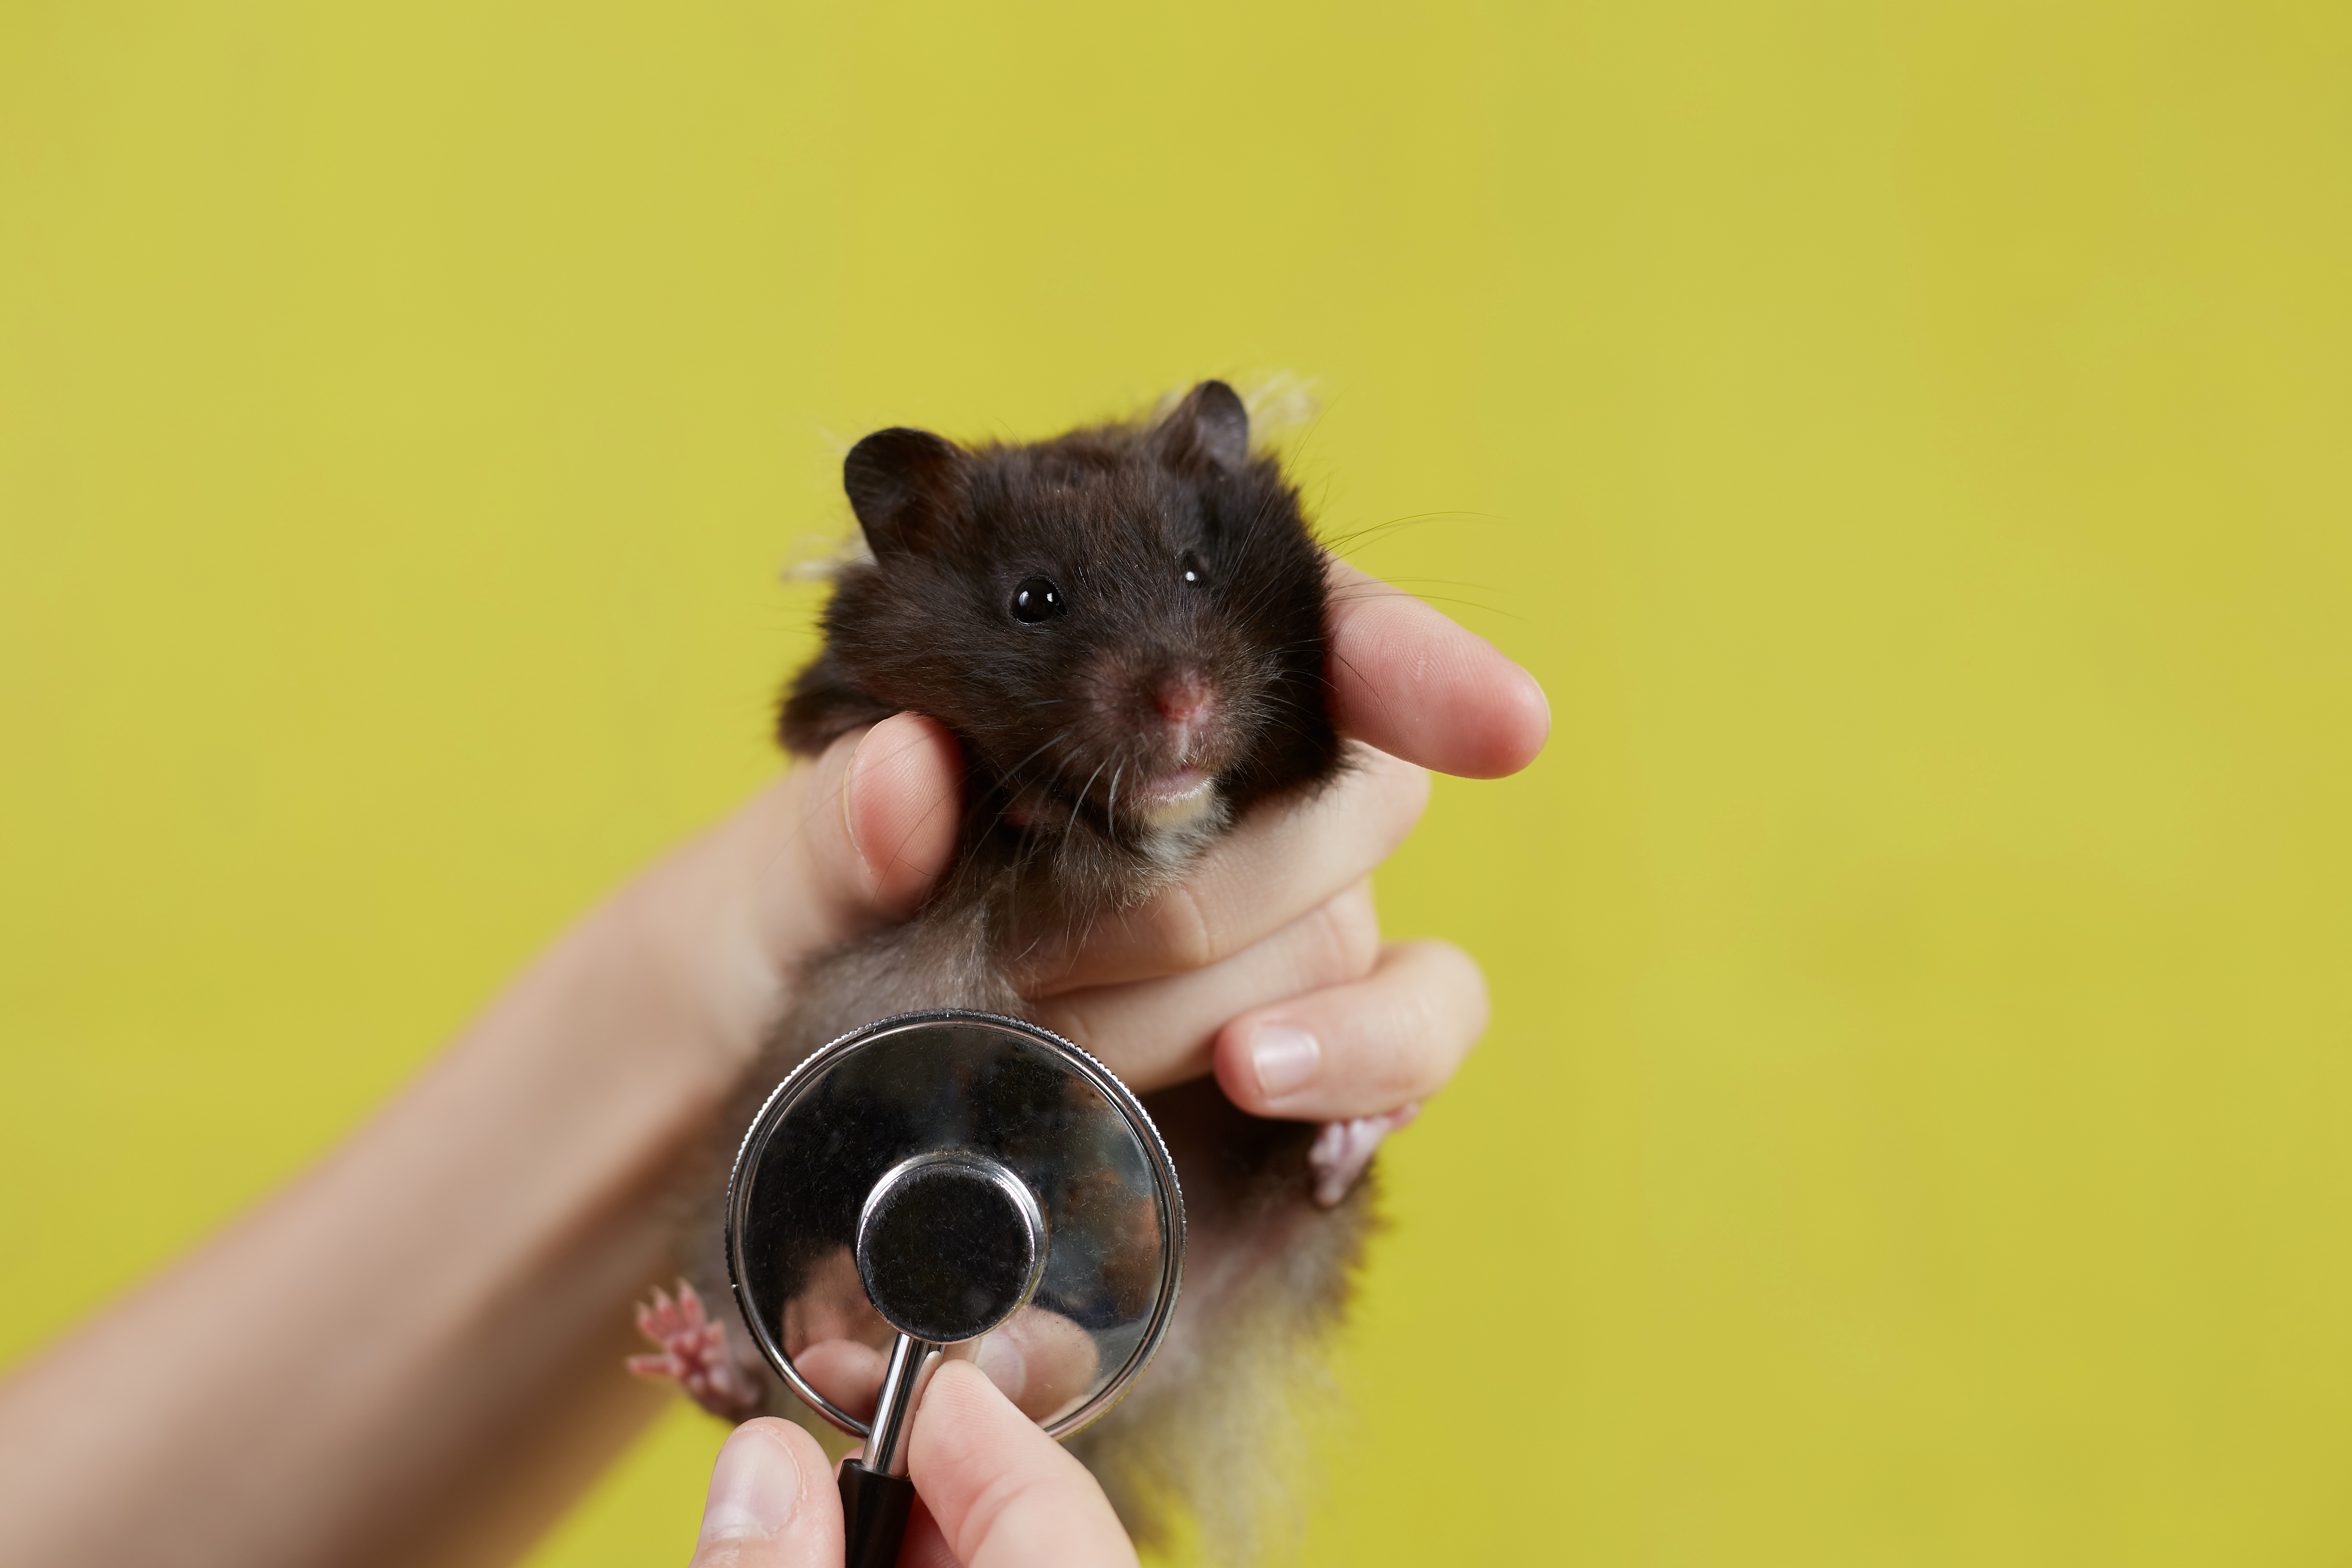 What is a Dwarf Hamster's Lifespan? How long do they live for?